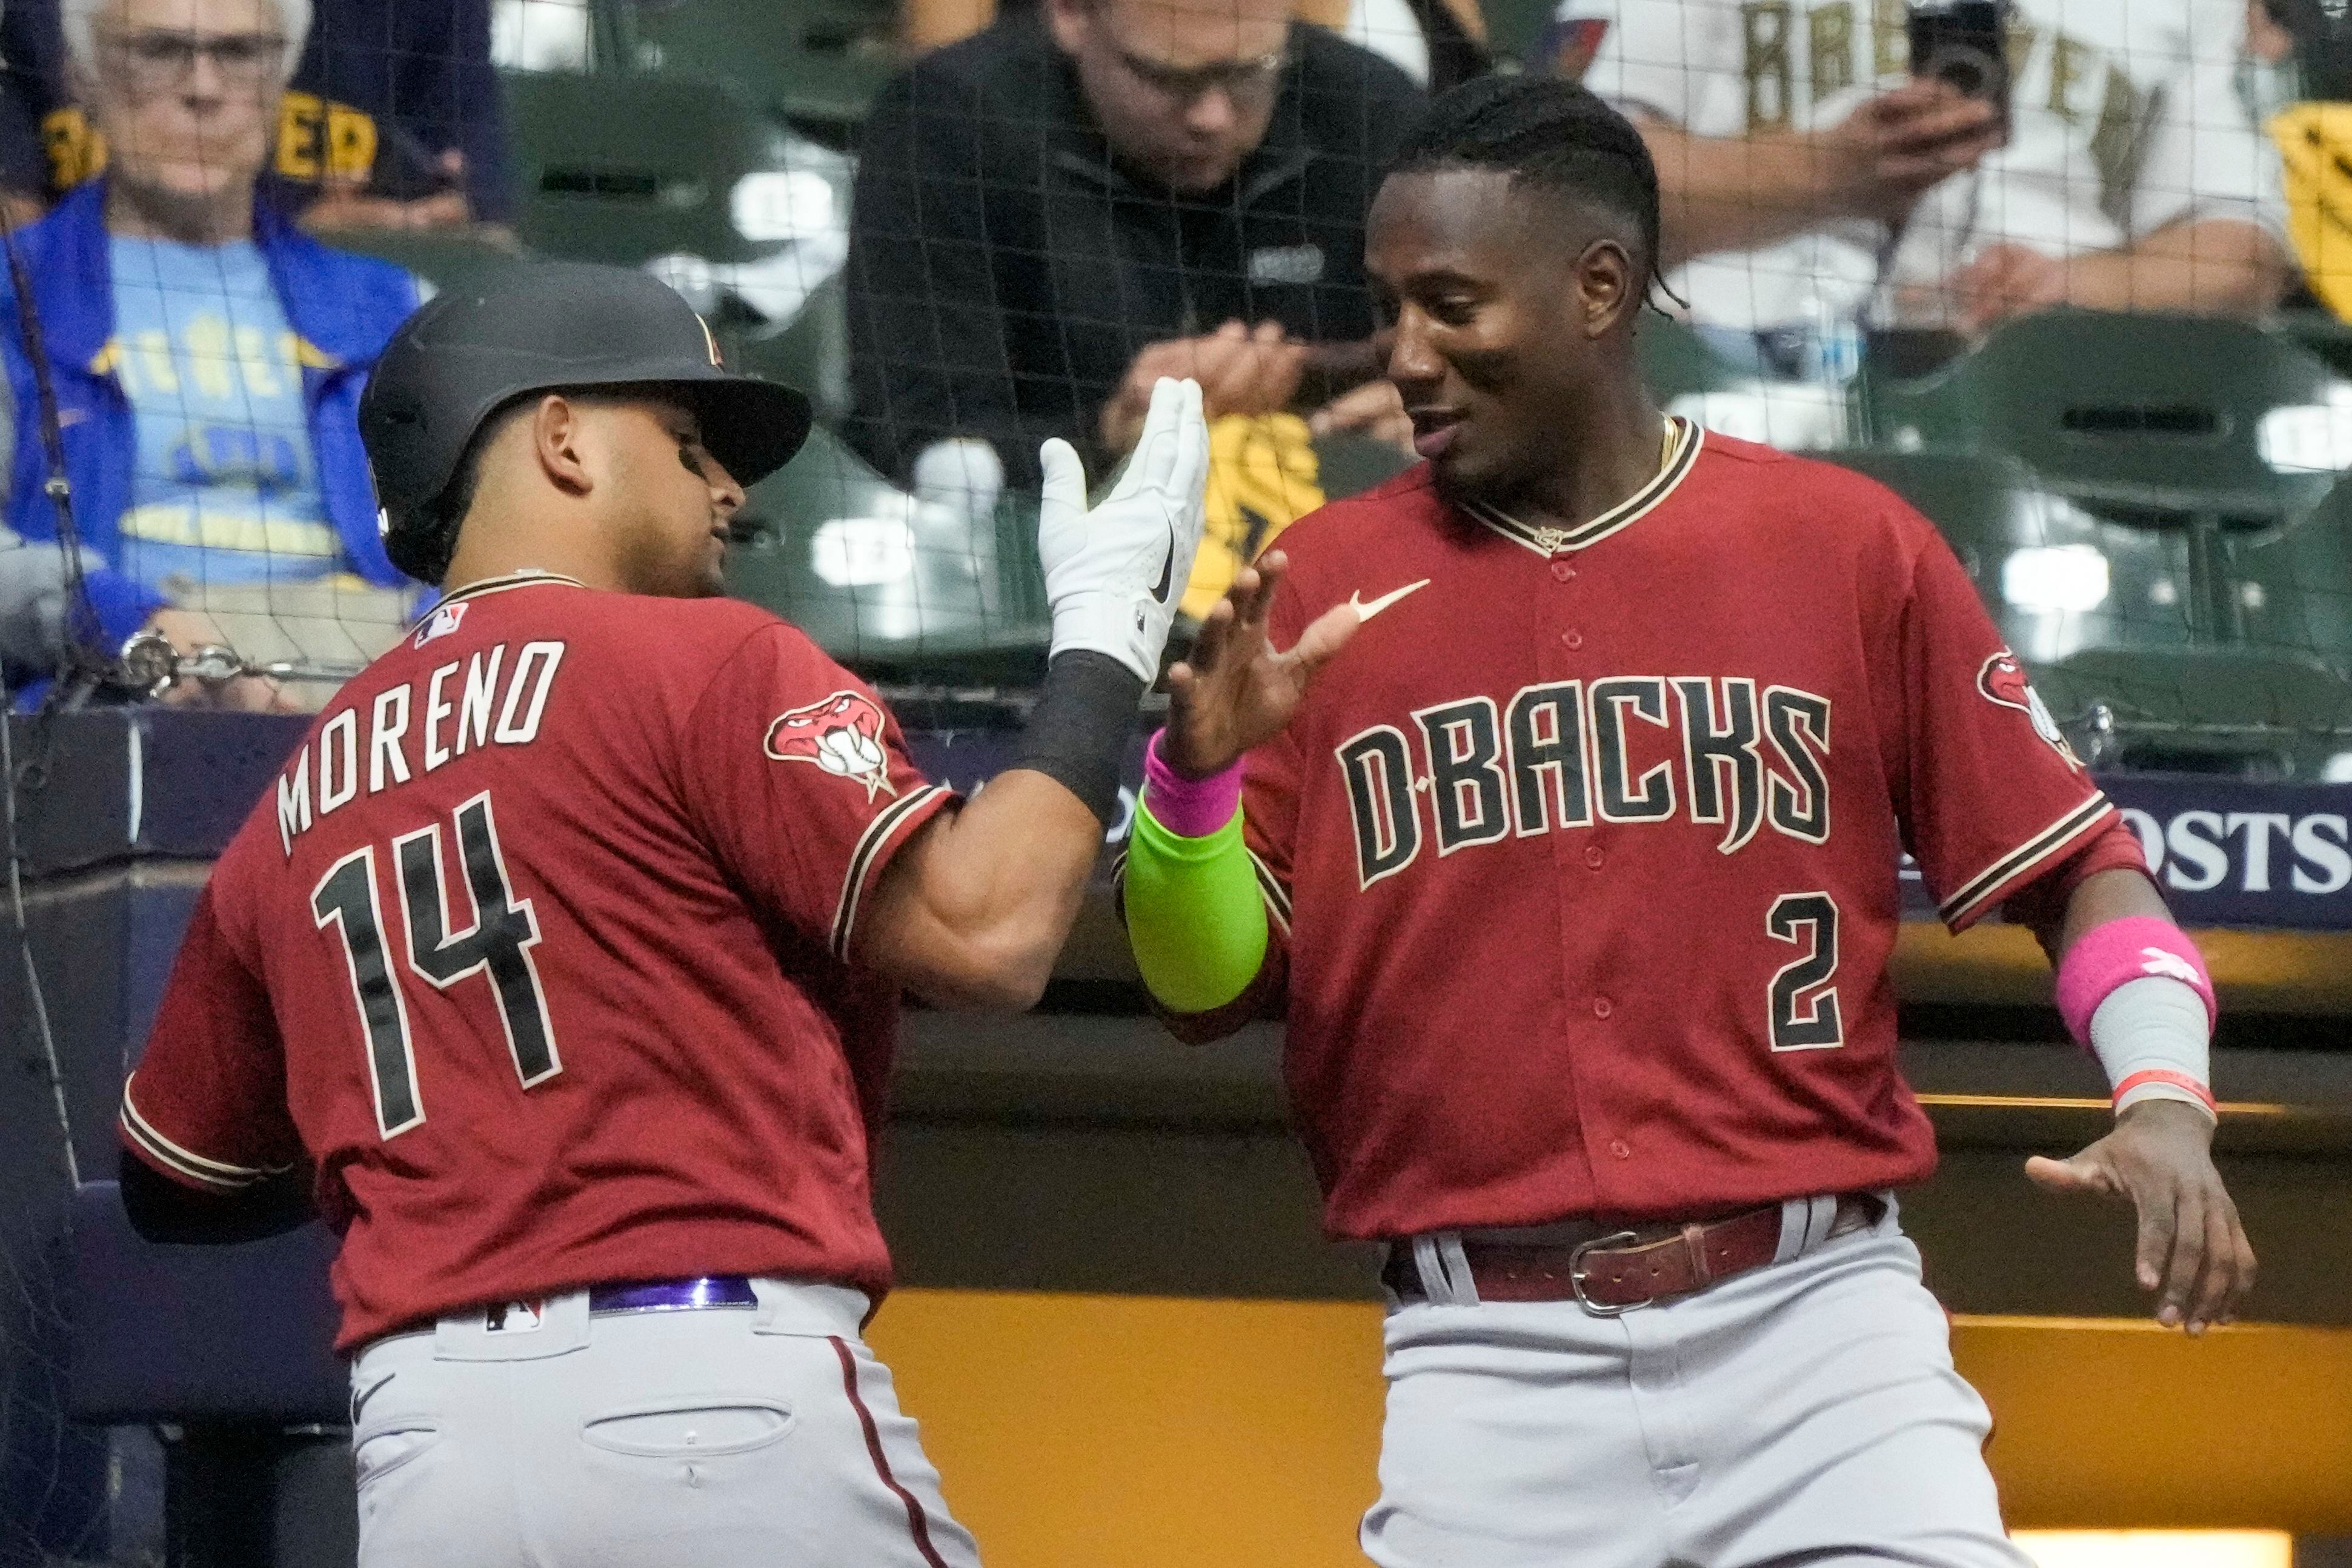 Josh Donaldson homers and Freddy Peralta's strong pitching lead